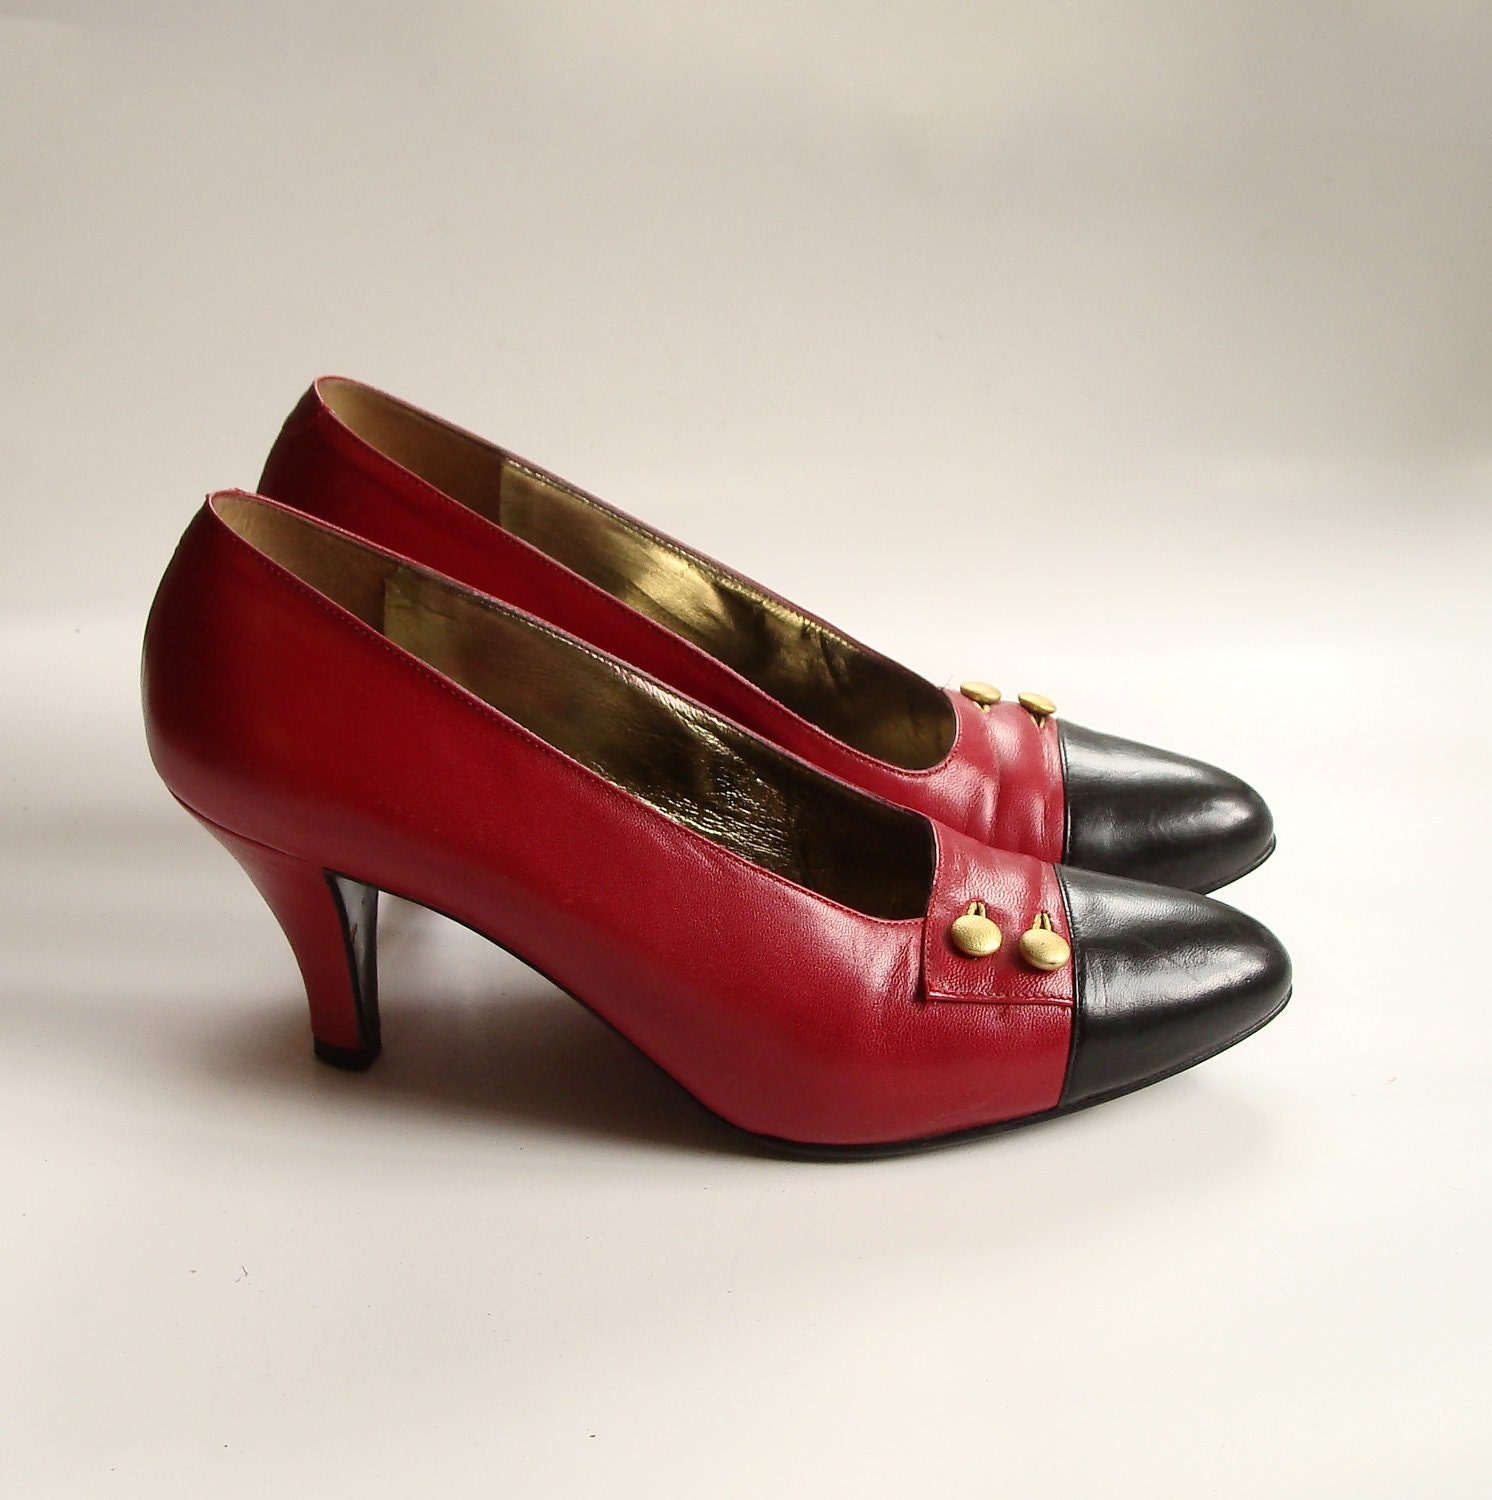 shoes size 5.5 / red and black leather heels / 1980s pumps